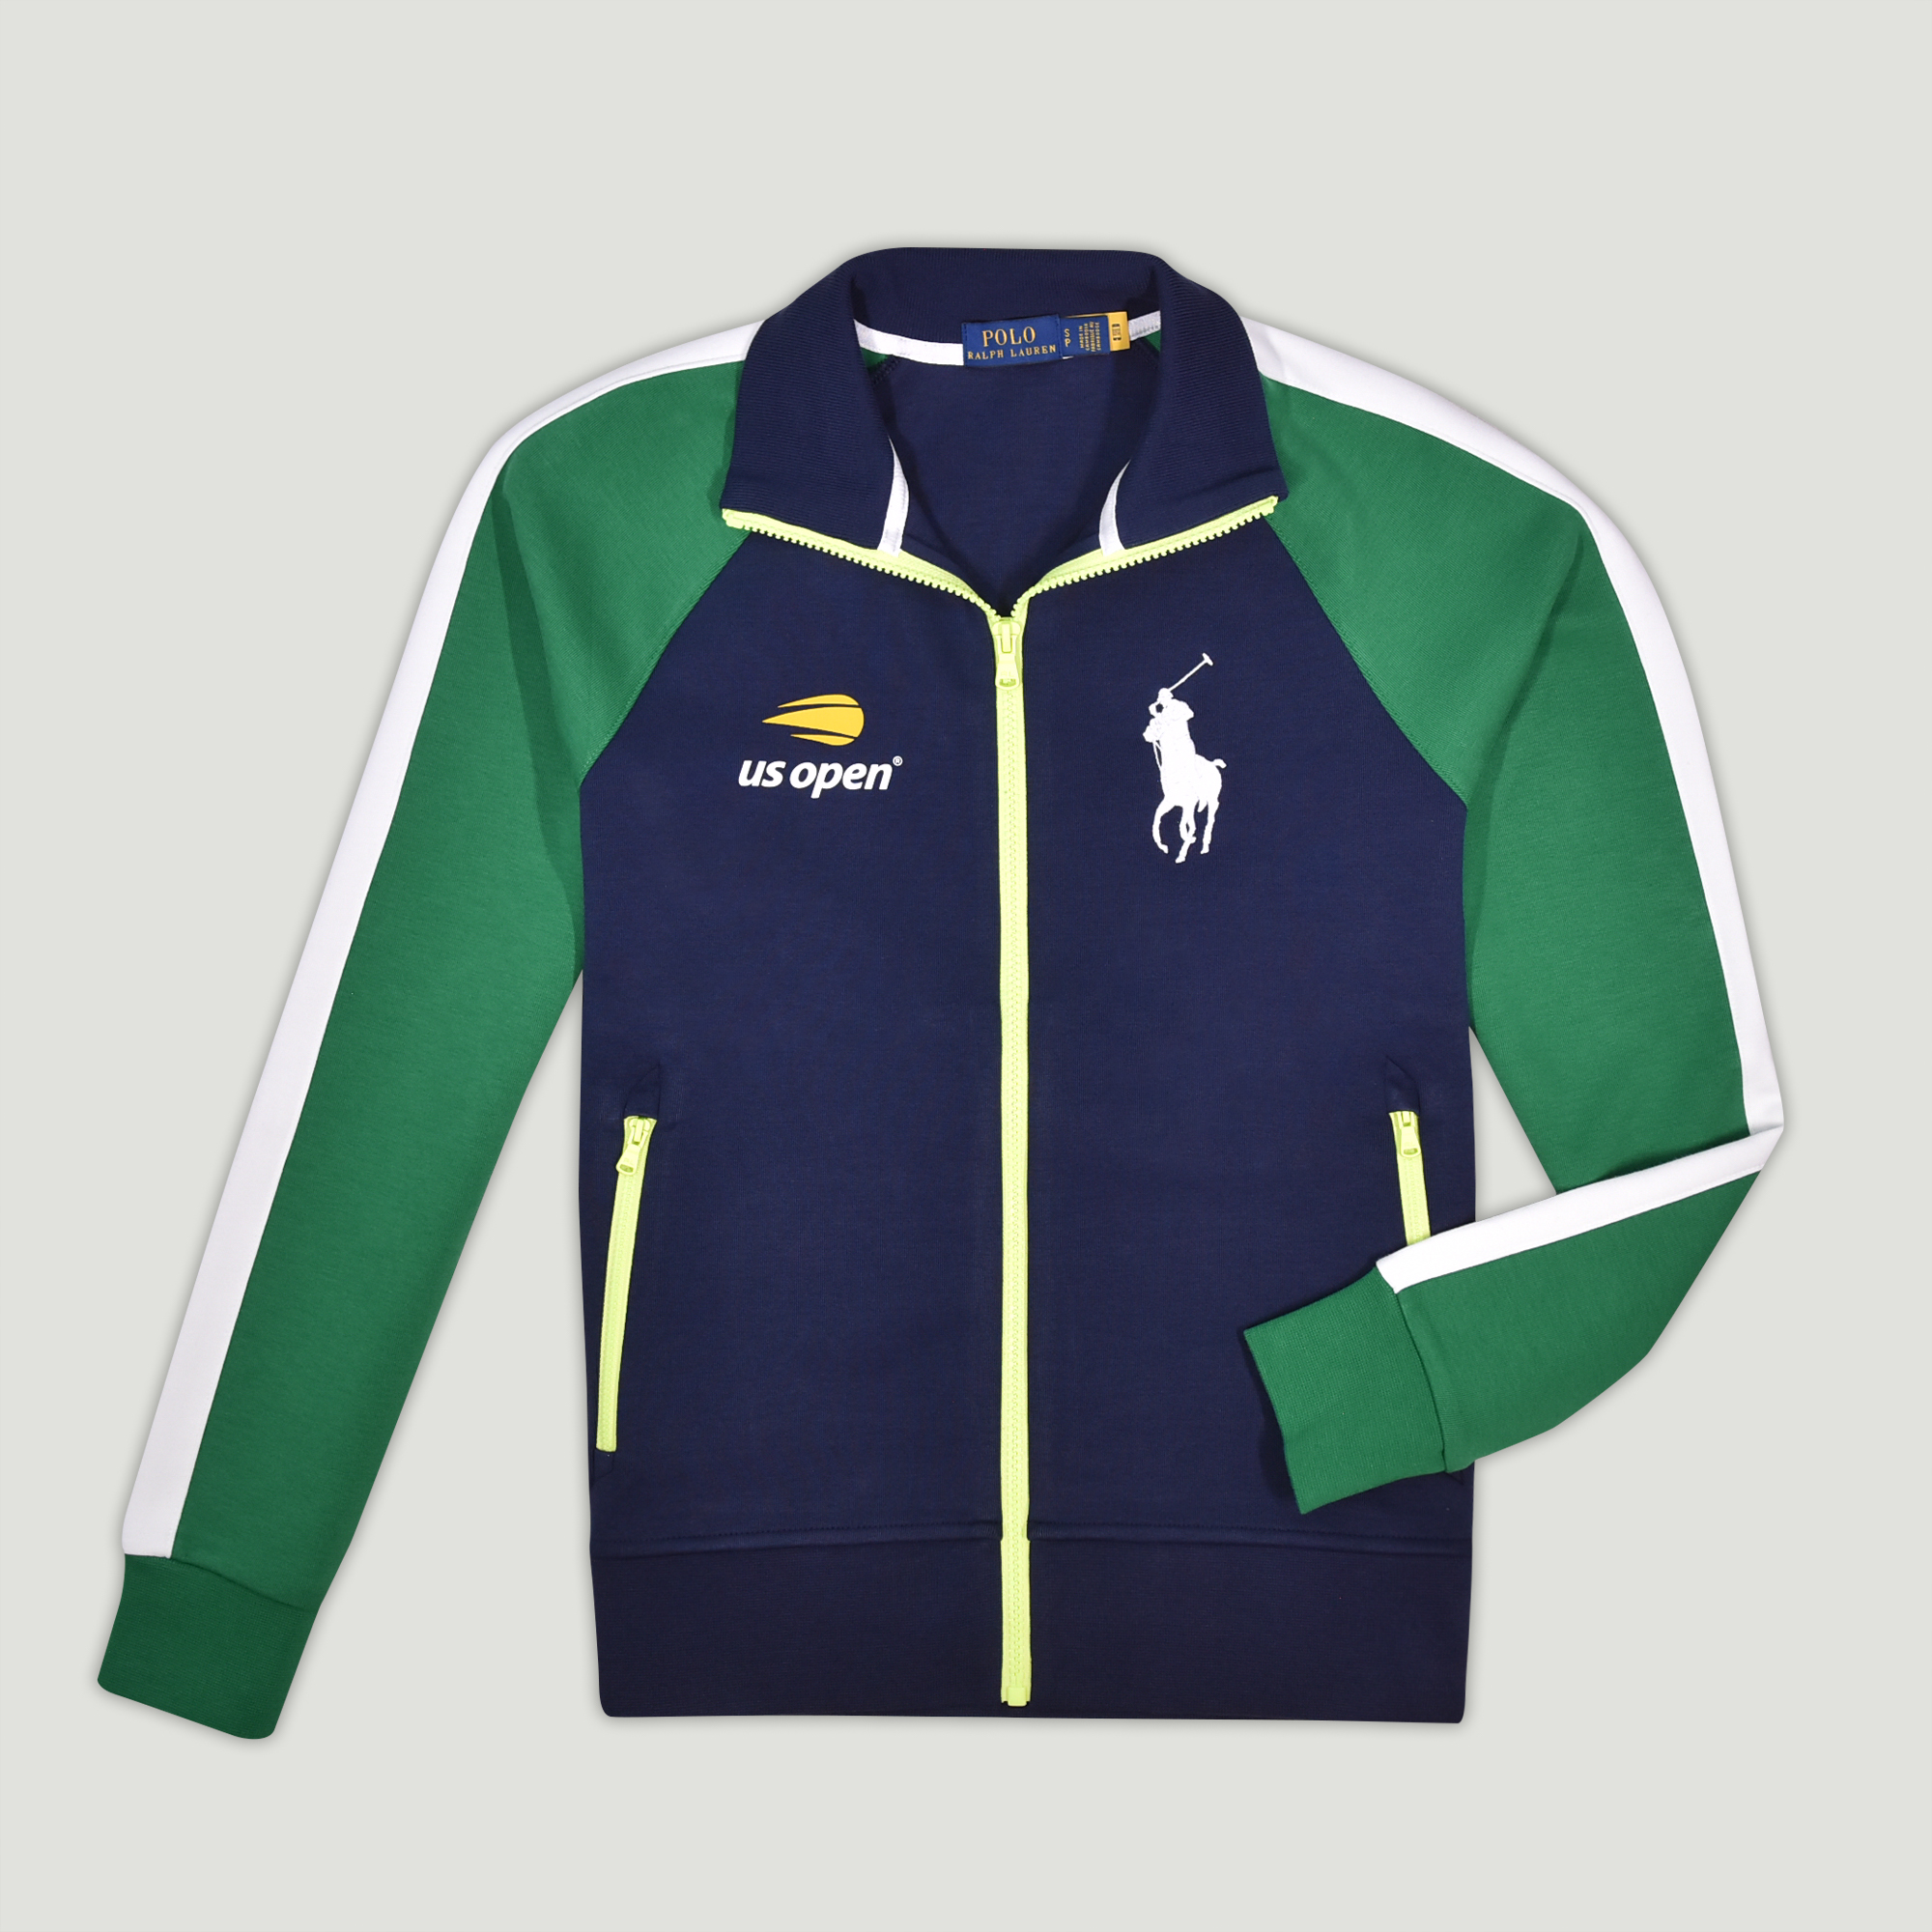 US Open 2023 Official On-Court Ball Girl Jacket by Polo Ralph Lauren